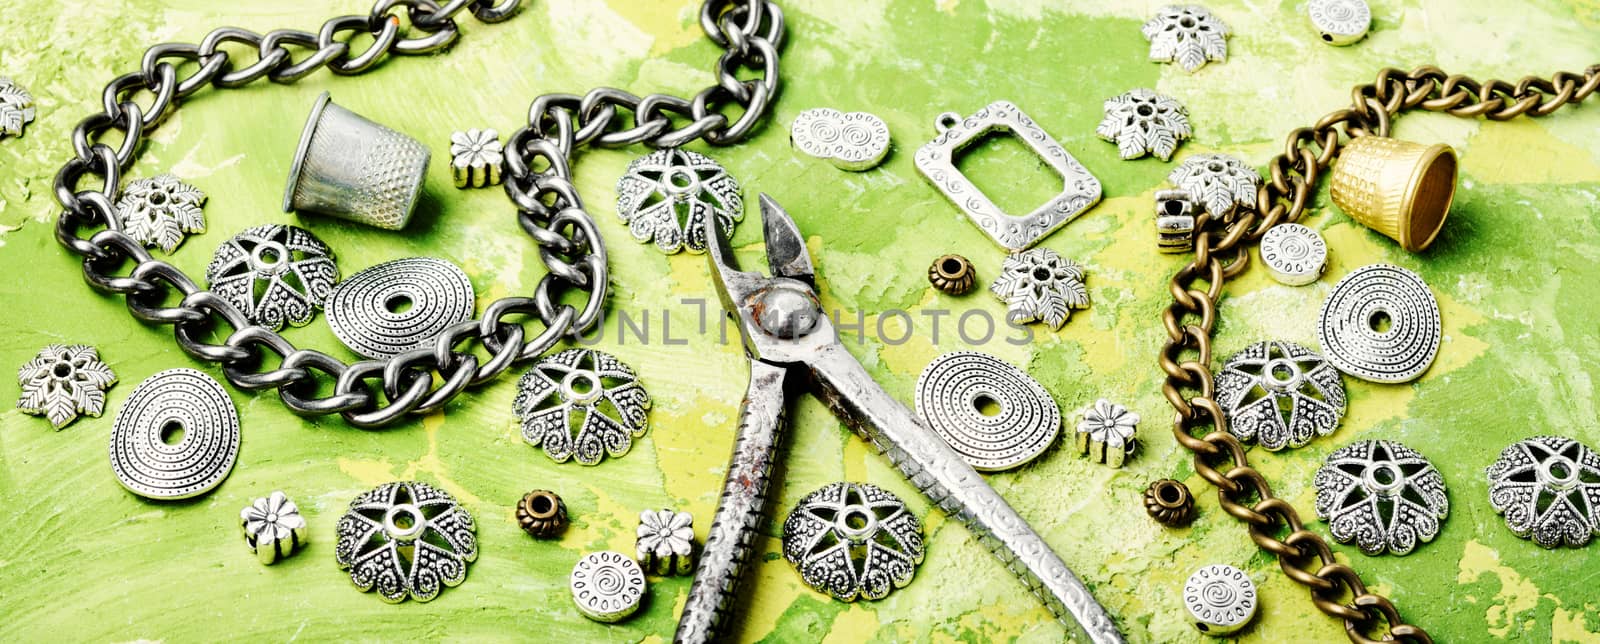 Stylish female retro jewelry made of chains, beads and pendants.Bijouterie making